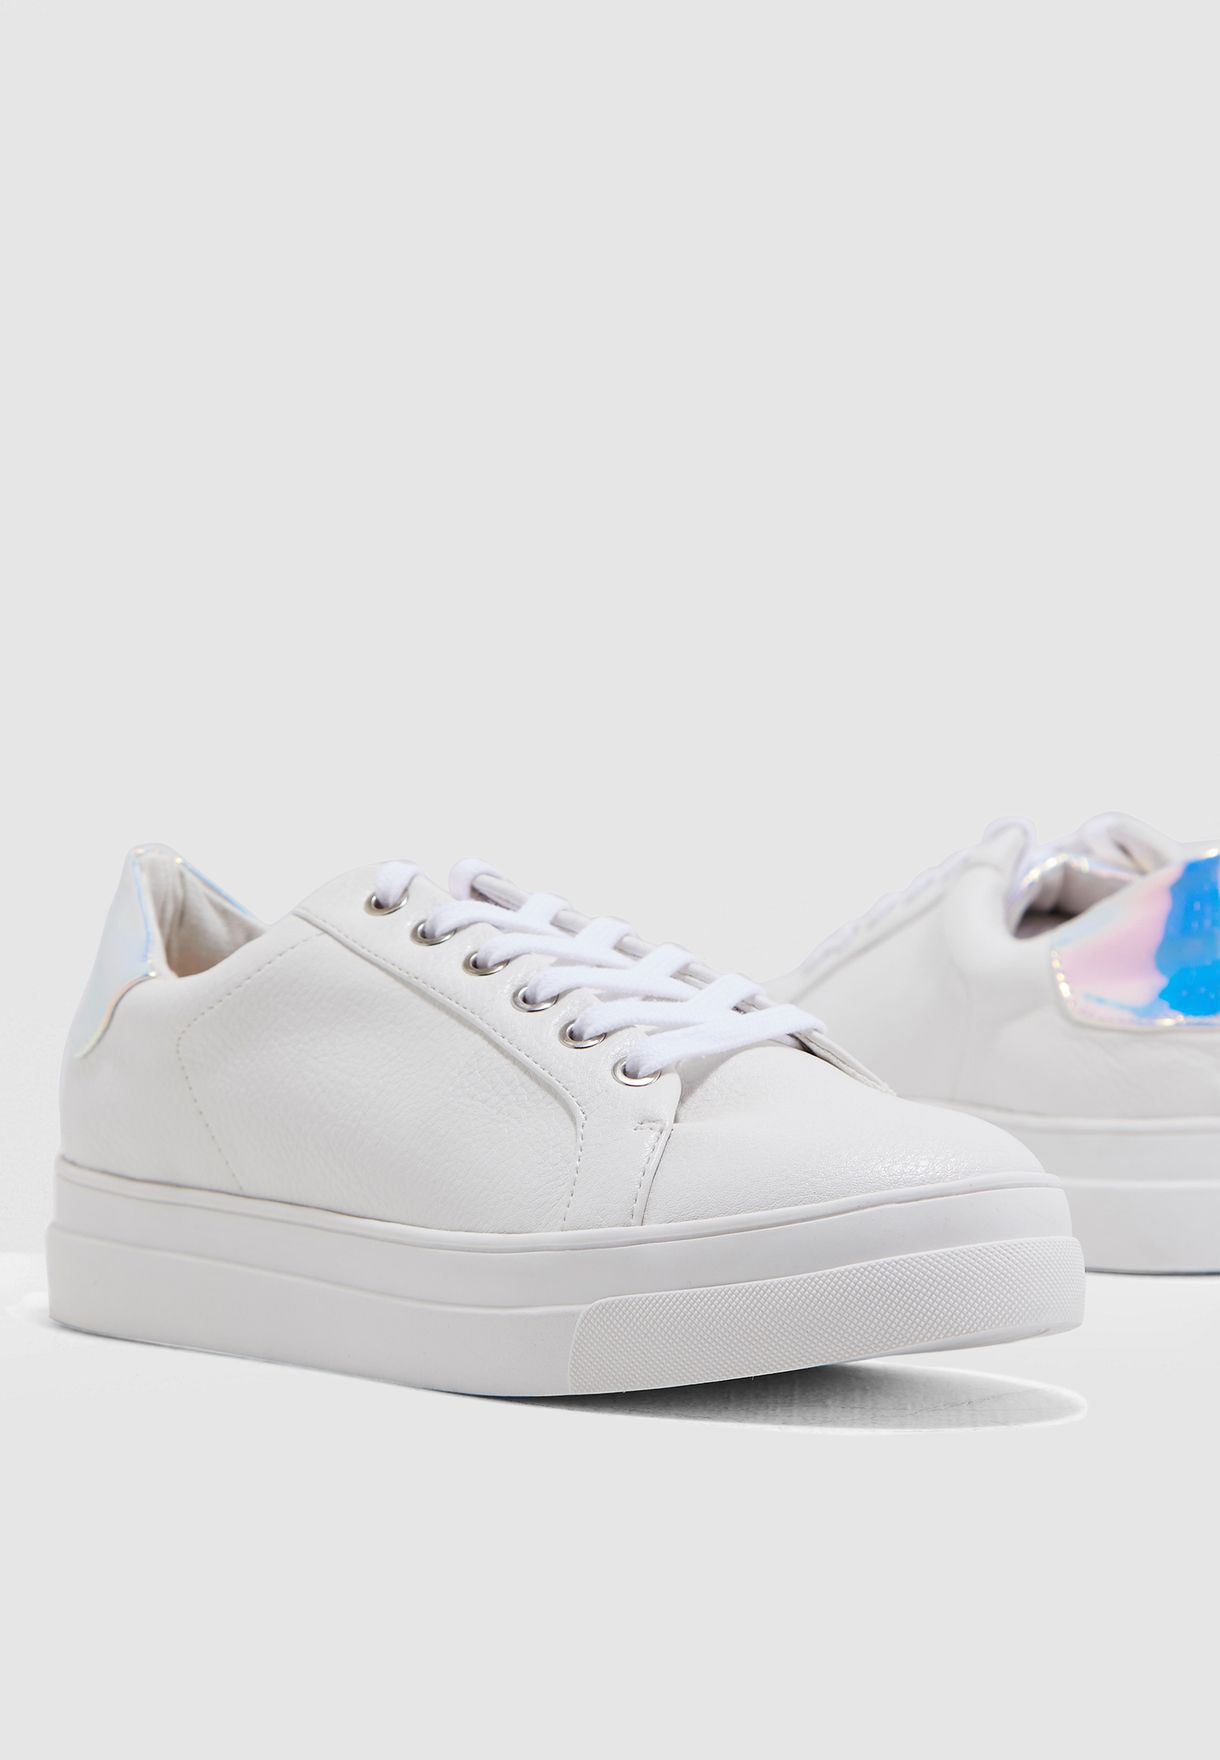 topshop candy lace up trainers